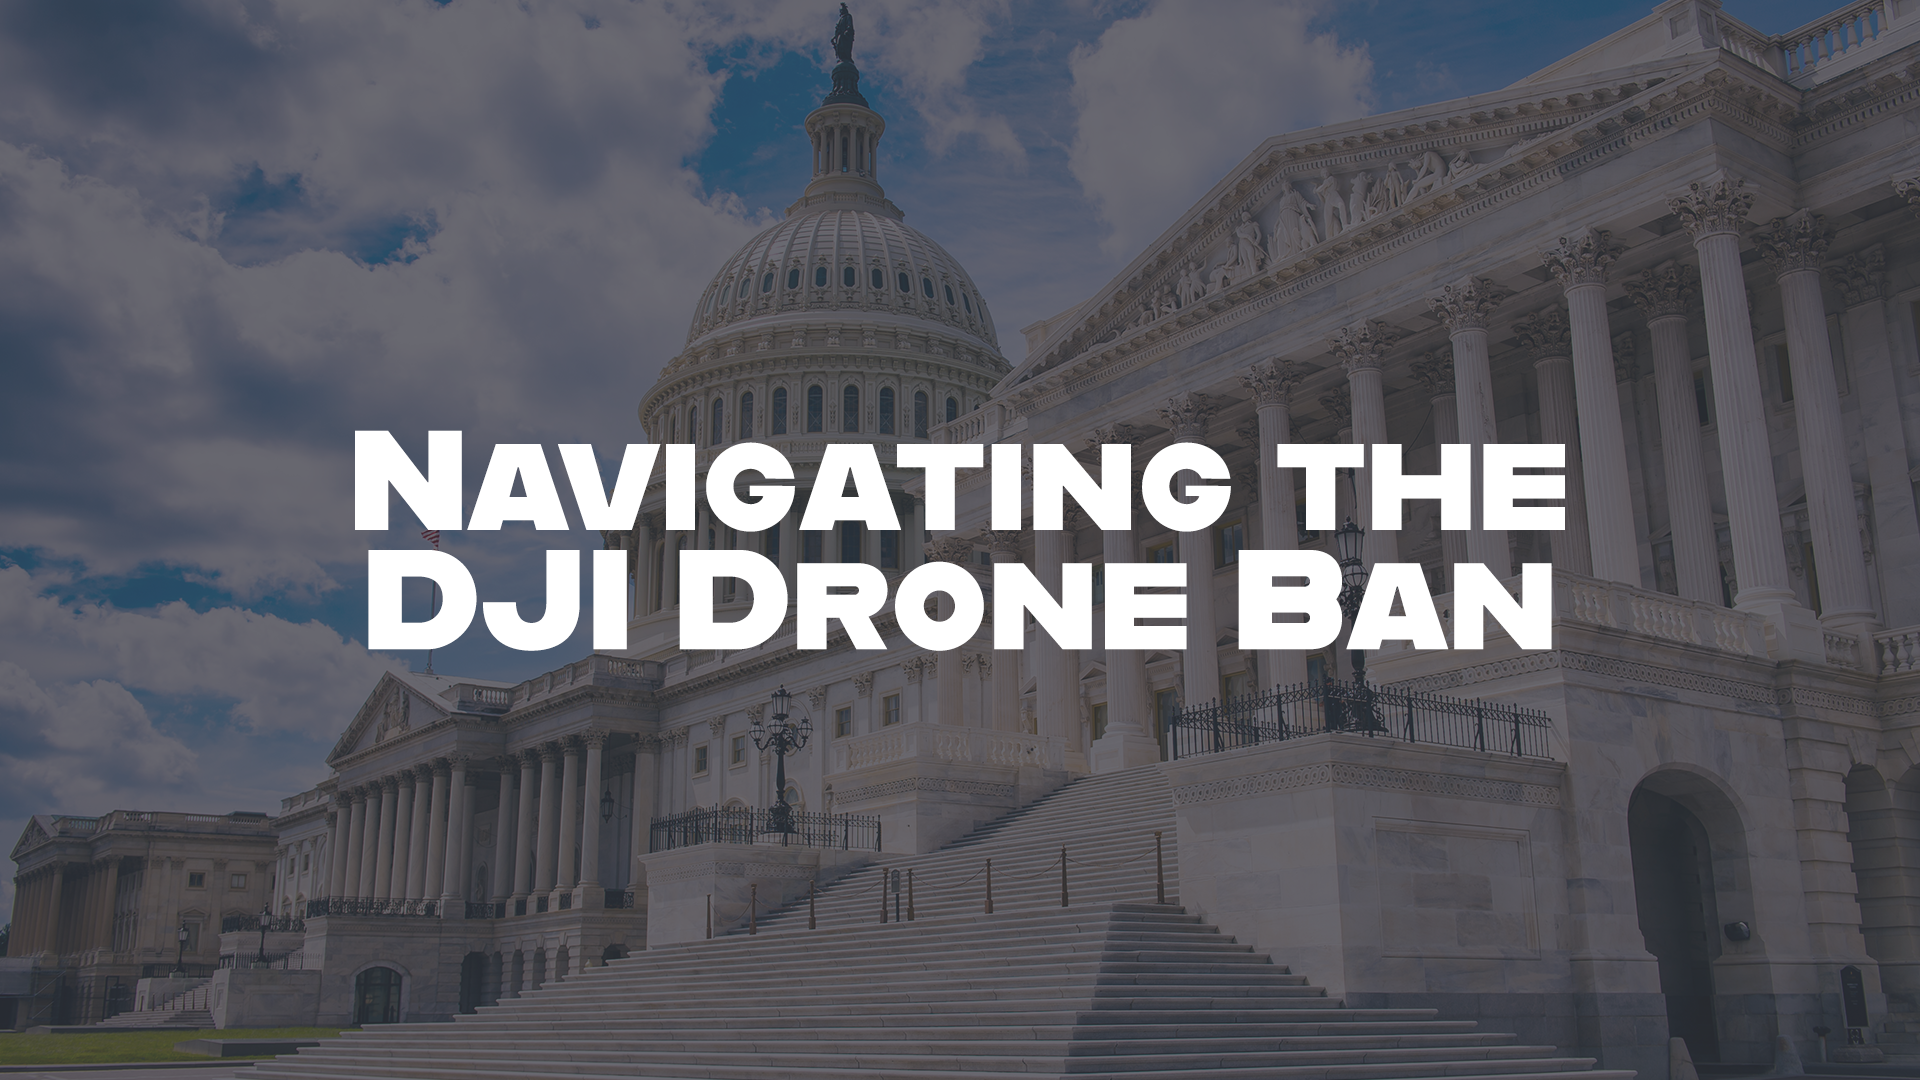 U.S. Capitol building with the text "Navigating the DJI Drone Ban" overlayed on the image.